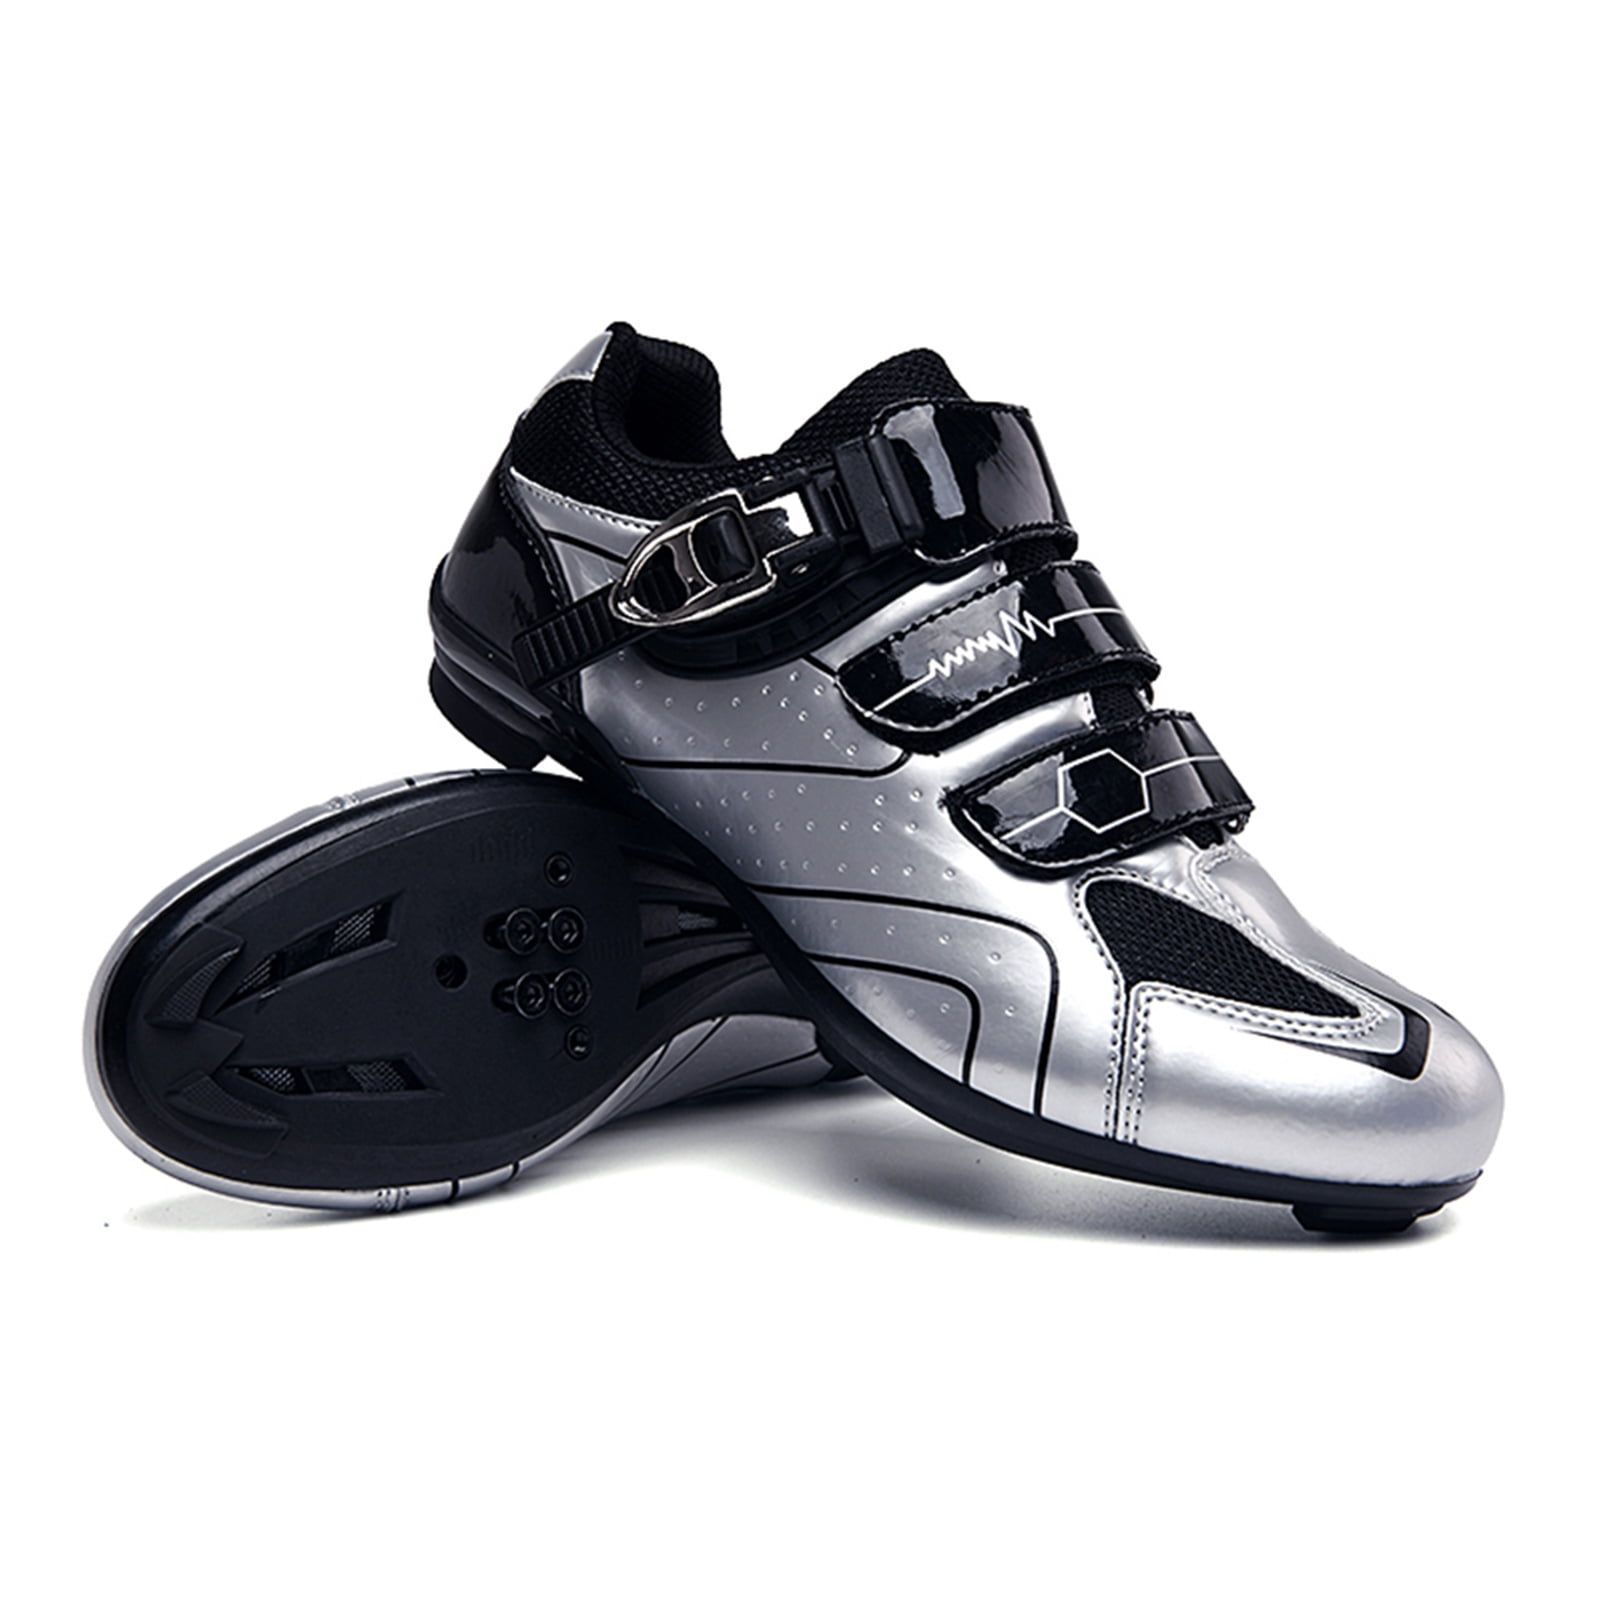 Details about   Ultralight Road Cycling Shoes MTB Bicycle Sneakers Mens Racing Bike SPD Shoes 